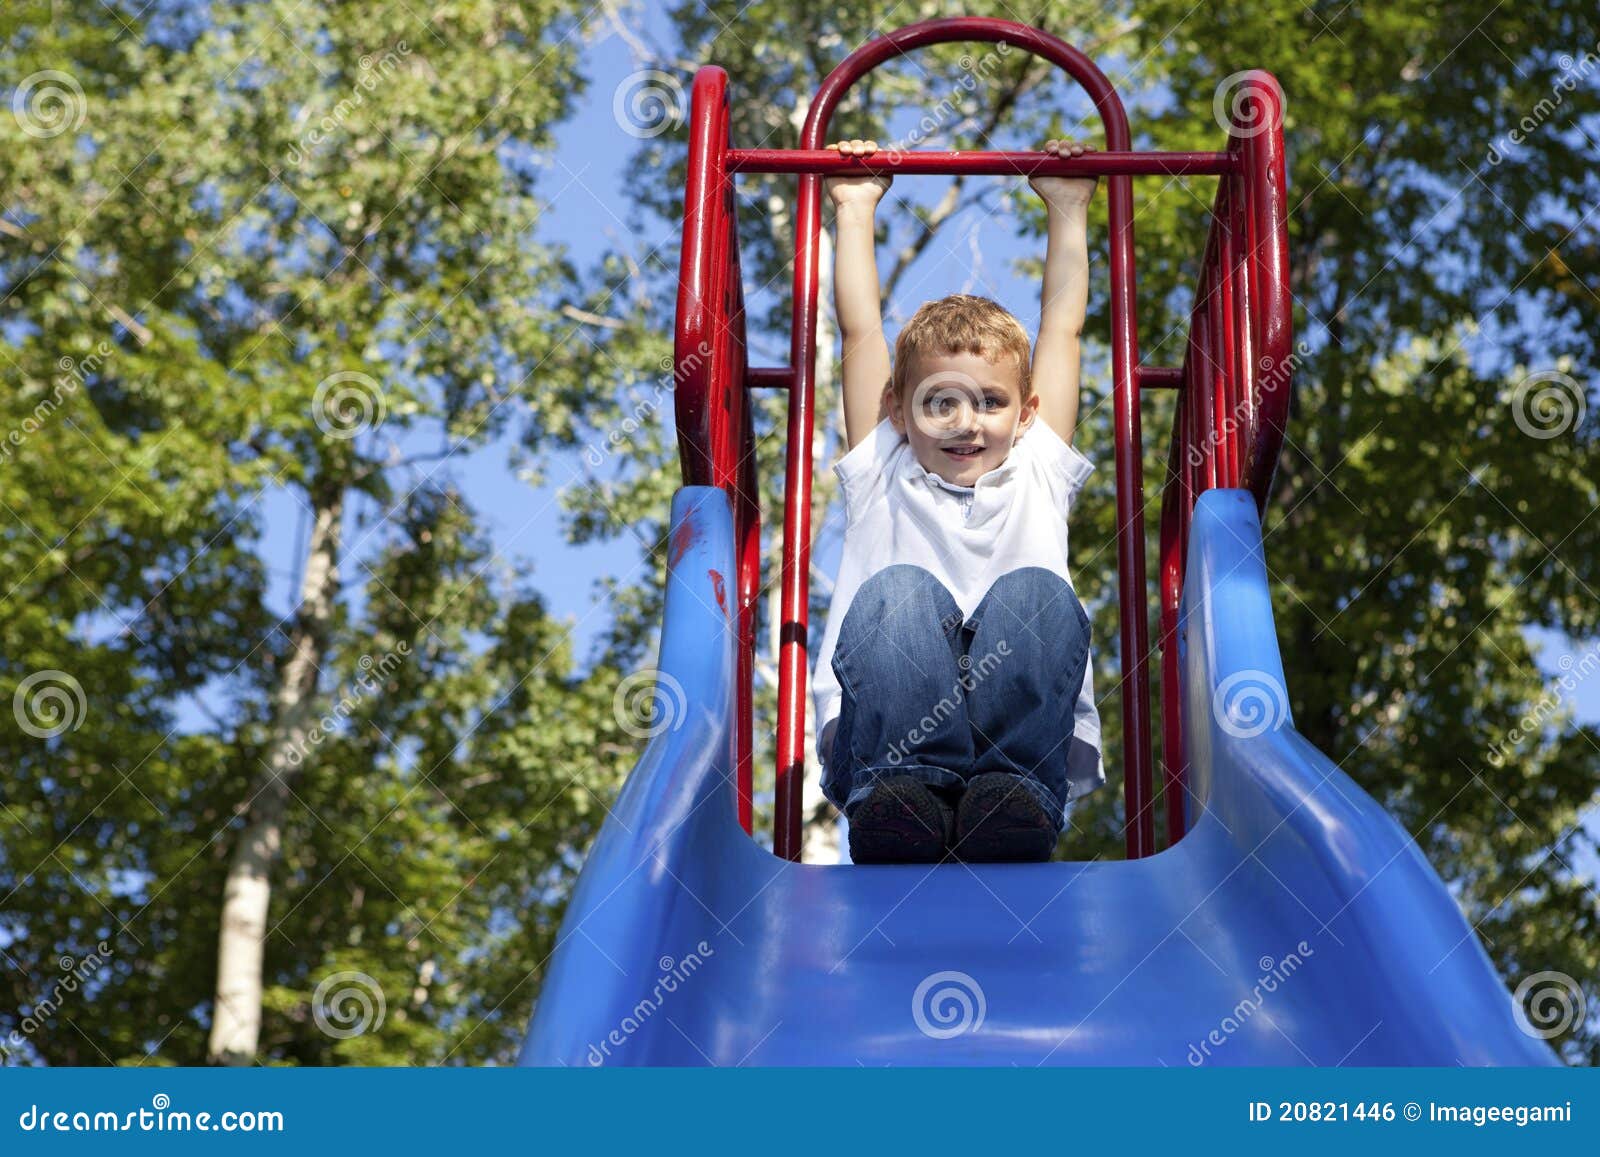 boy playing on a slide at the park